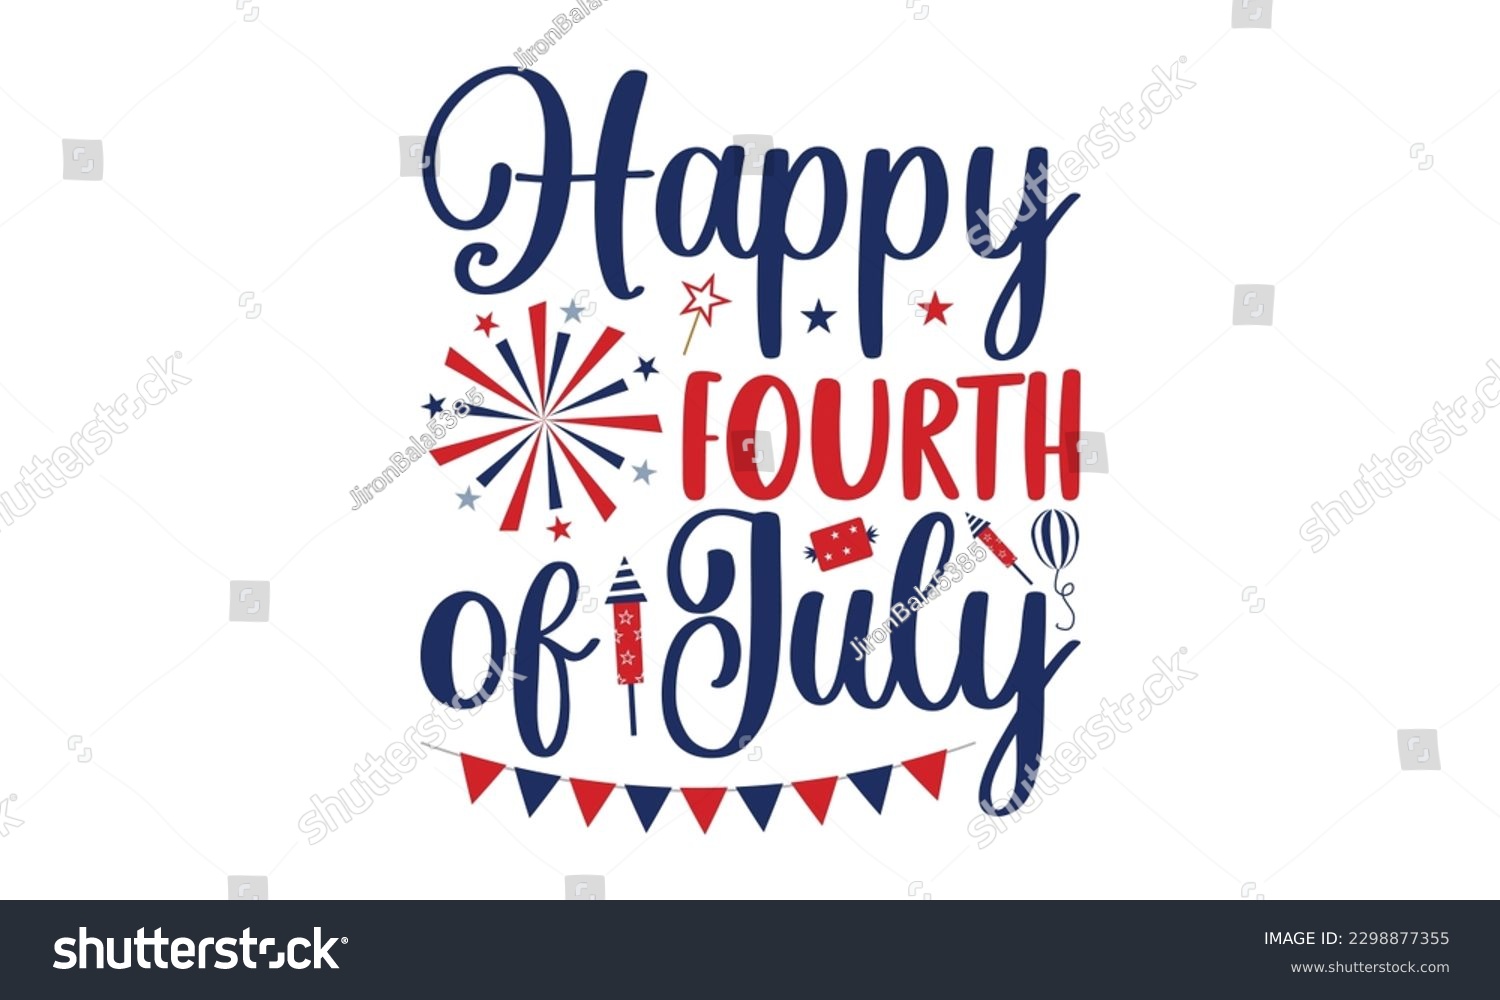 SVG of Happy Fourth Of July - 4th of July SVG Design, typography design, Illustration for prints on t-shirts, bags, posters, for Cutting Machine, Silhouette Cameo, Cricut.
 svg